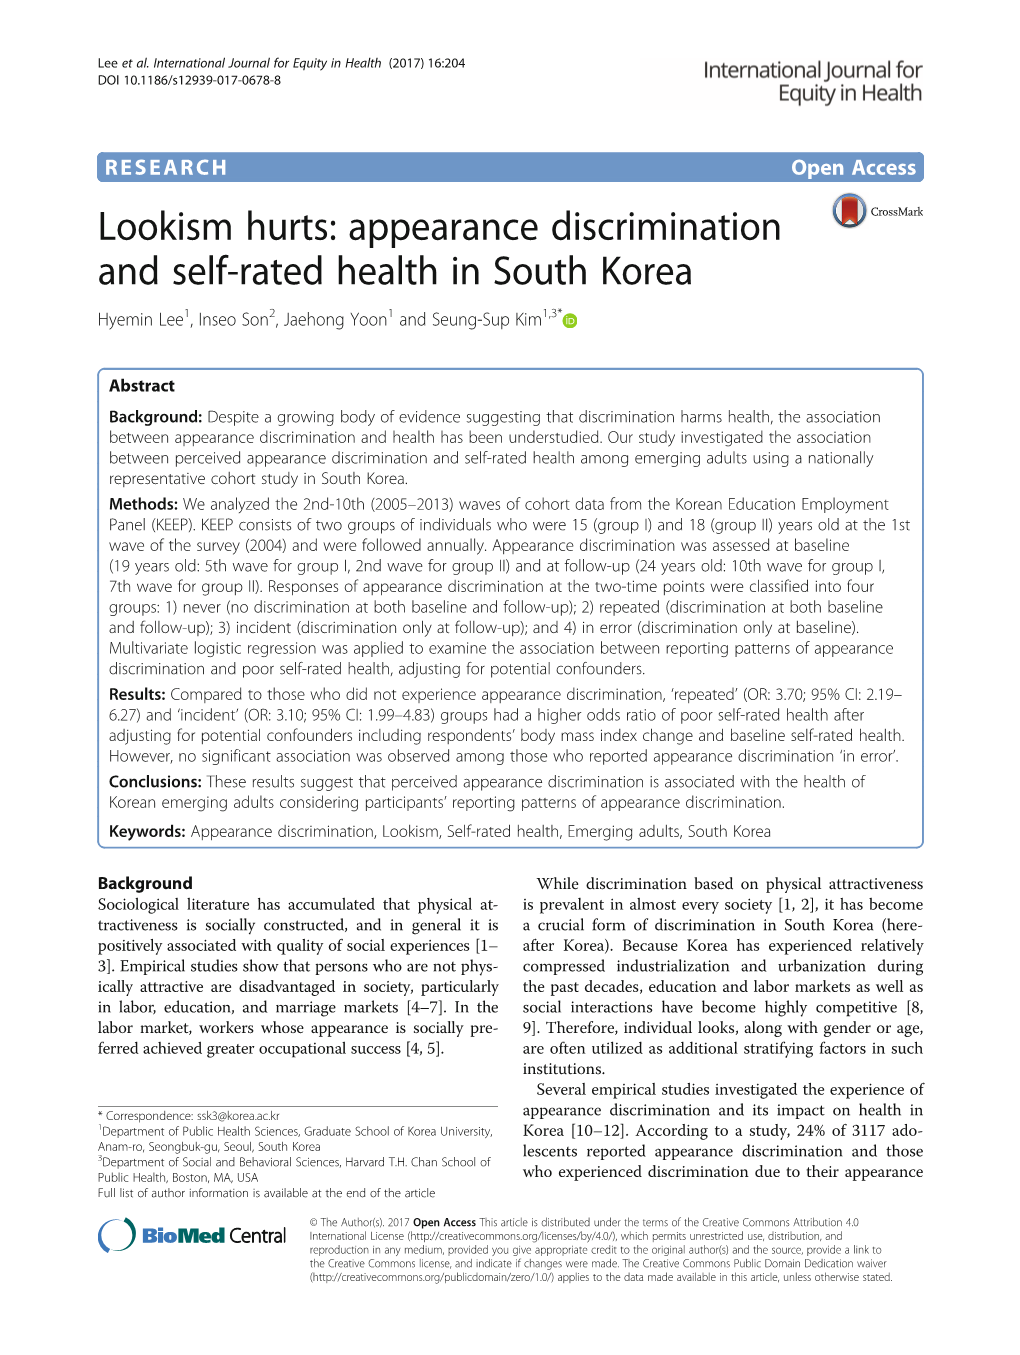 Lookism Hurts: Appearance Discrimination and Self-Rated Health in South Korea Hyemin Lee1, Inseo Son2, Jaehong Yoon1 and Seung-Sup Kim1,3*